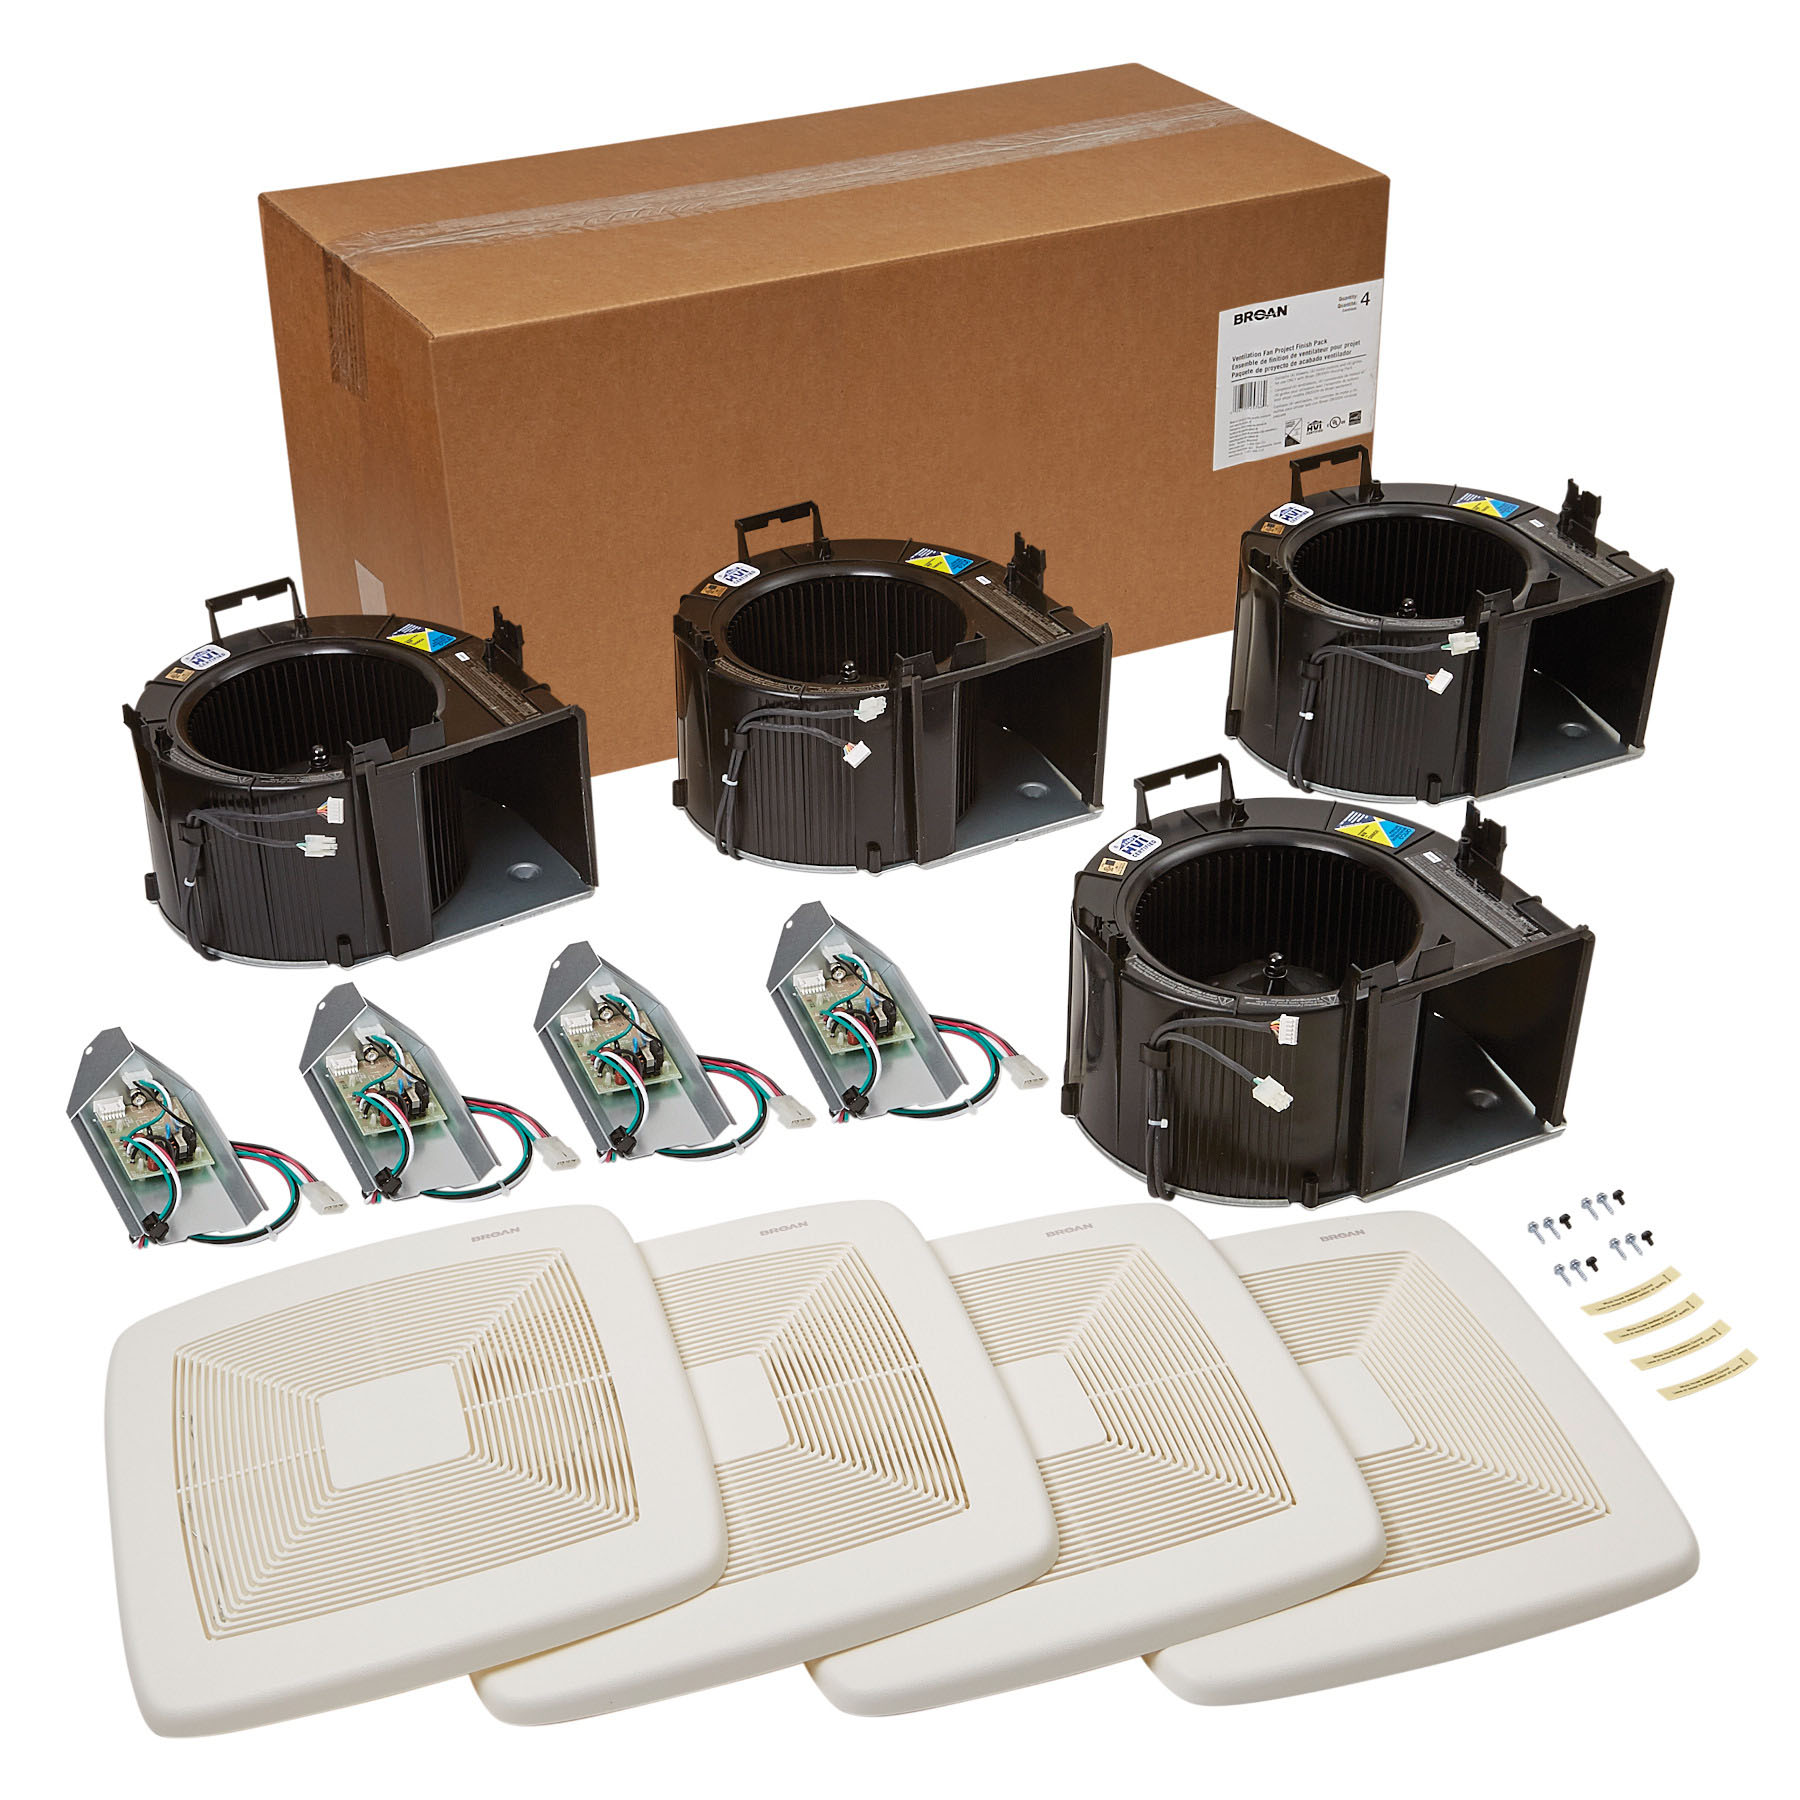 **DISCONTINUED** Broan® Exhaust Ventilation Fan Finish Pack, 80 CFM, ENERGY STAR® certified